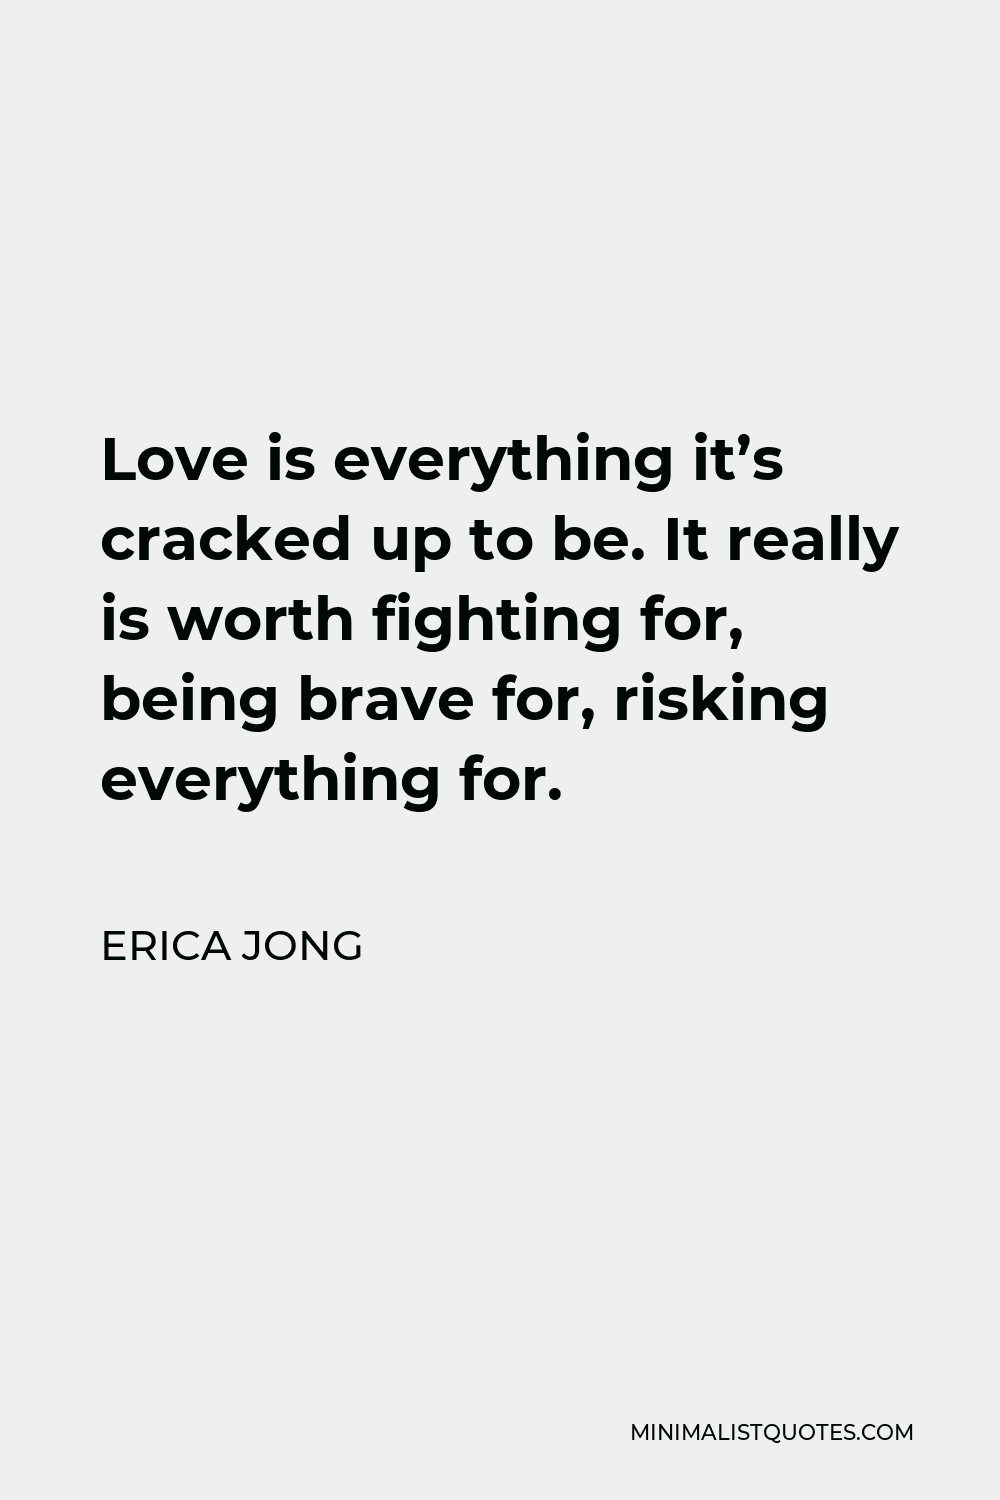 Erica Jong Quote - Love is everything it’s cracked up to be. It really is worth fighting for, being brave for, risking everything for.